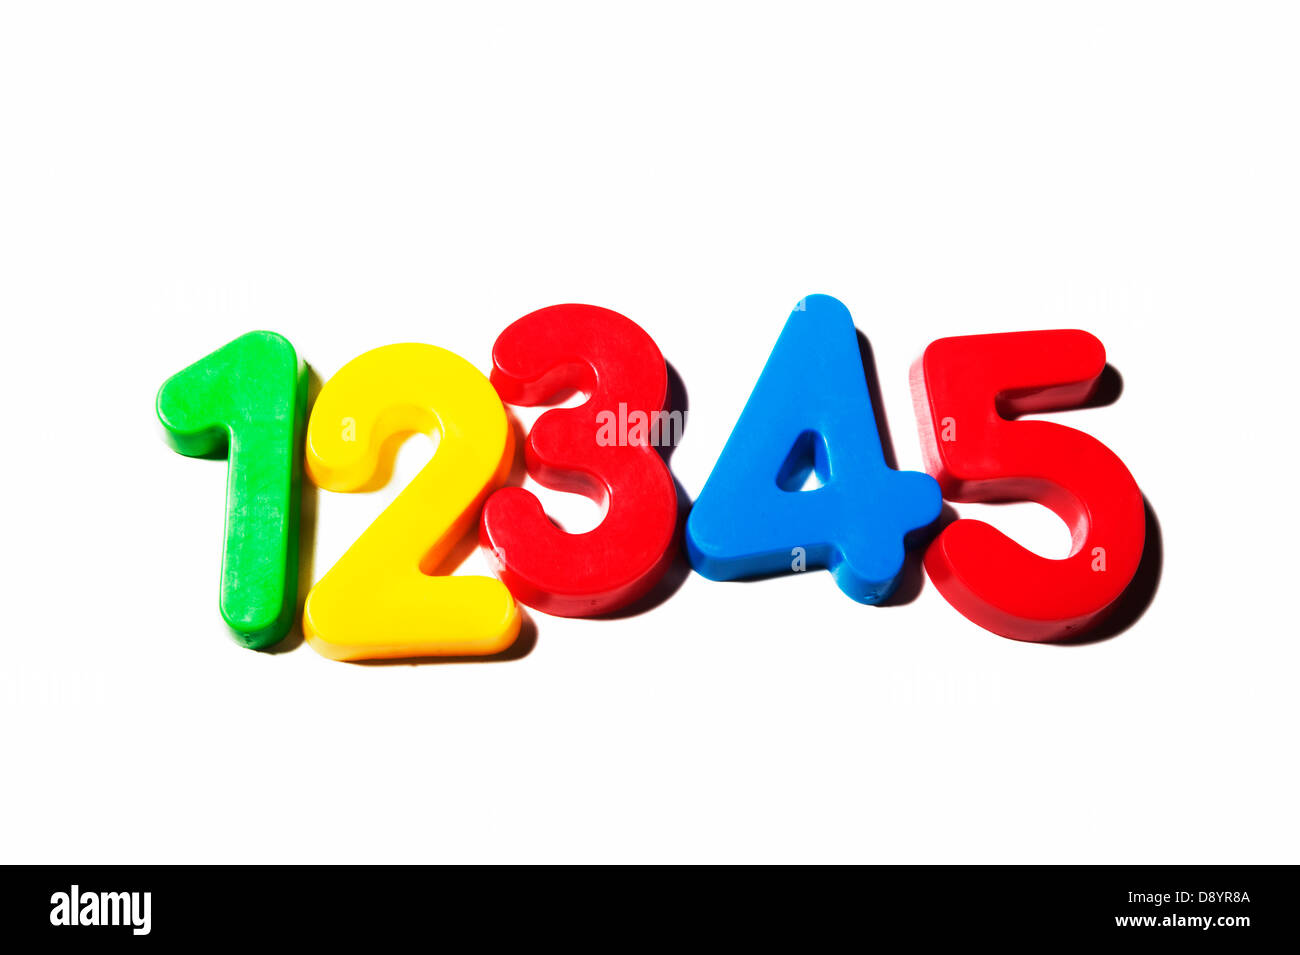 Toy numbers on white background, close-up Stock Photo